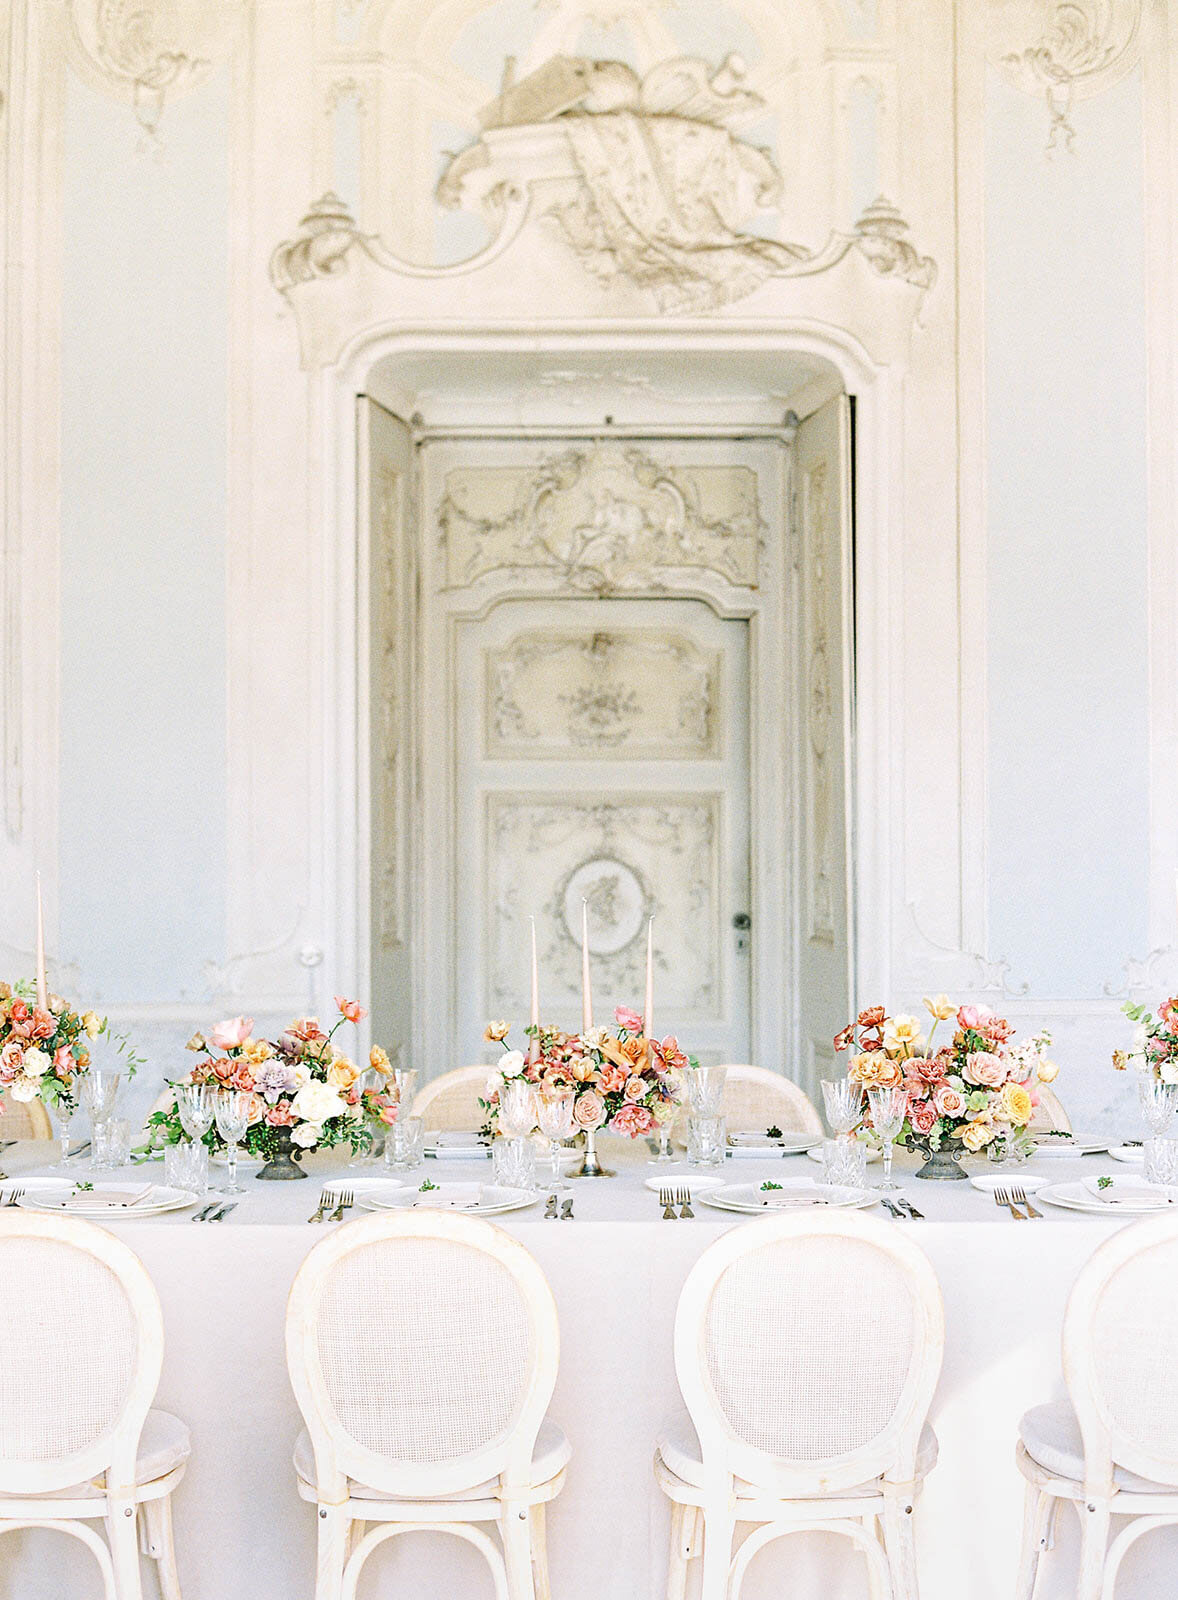 Wedding reception table in stucco room of Villa Sola Cabiati on Lake Como photographed by Italy Wedding photographer